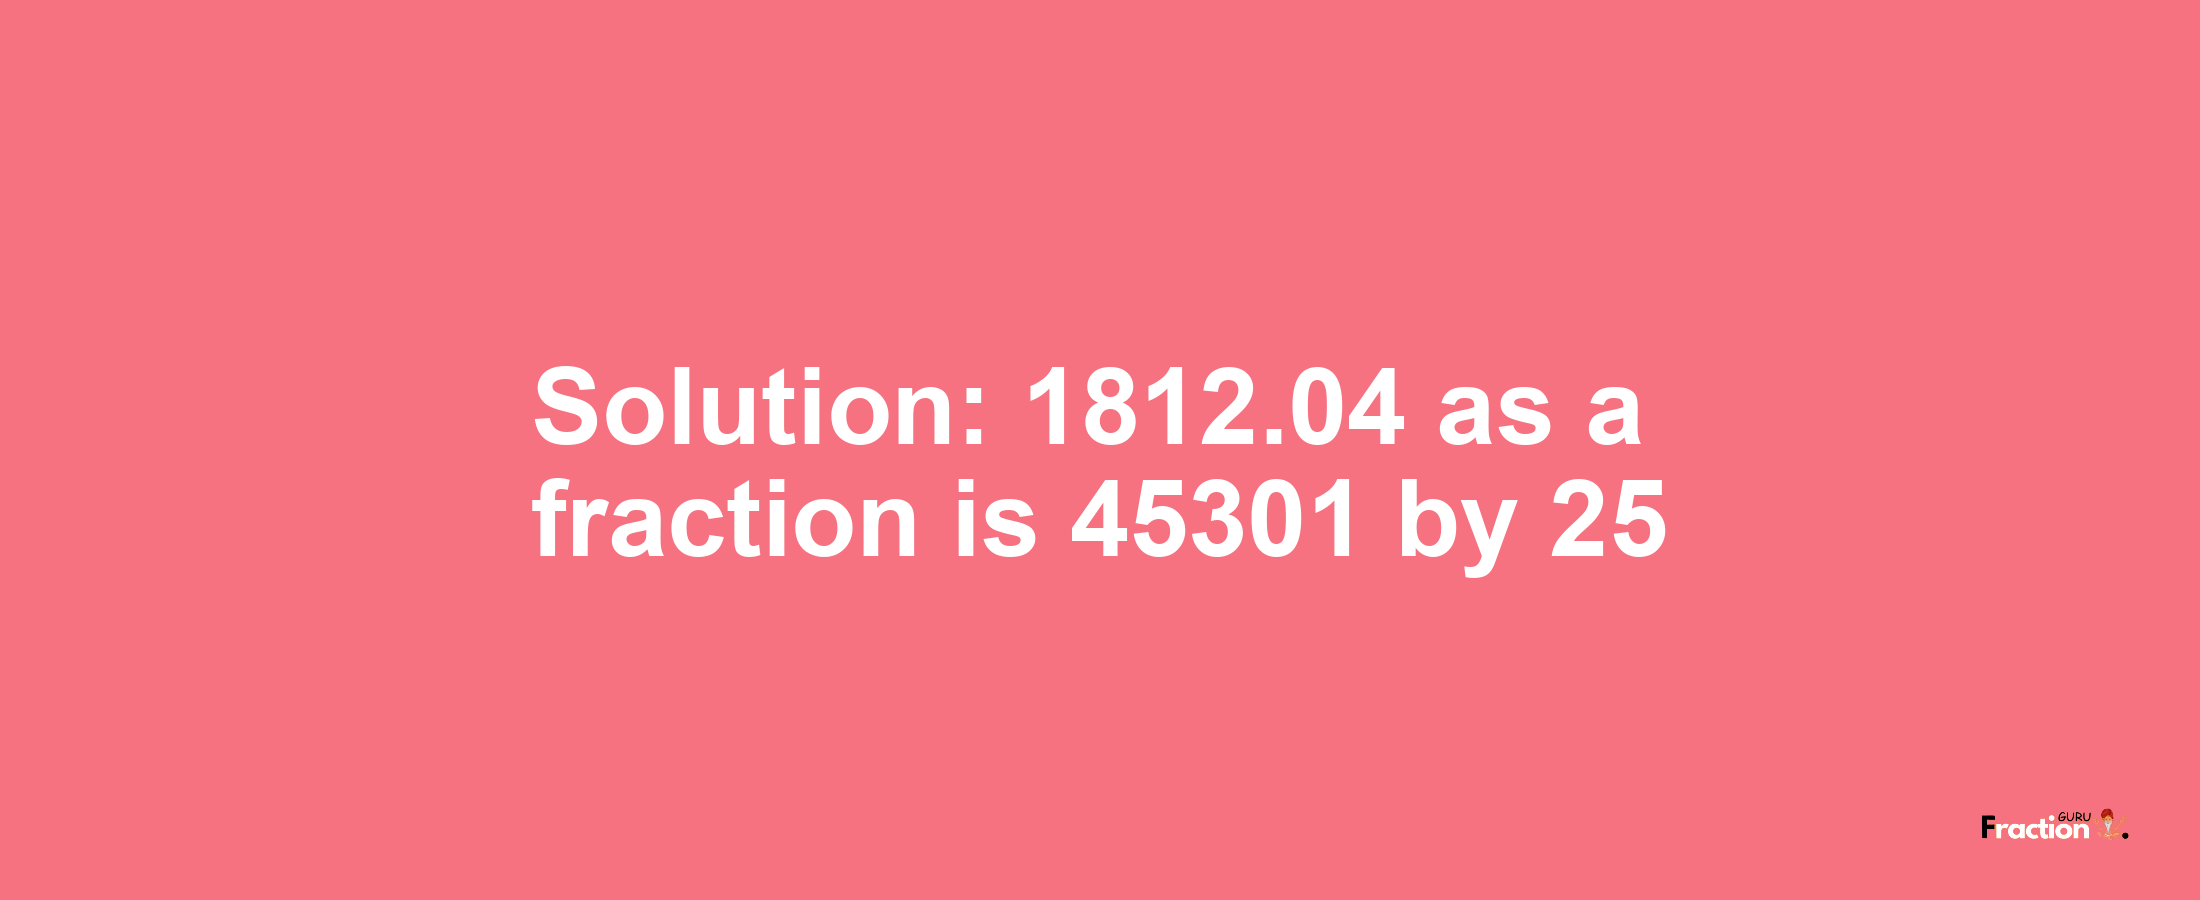 Solution:1812.04 as a fraction is 45301/25